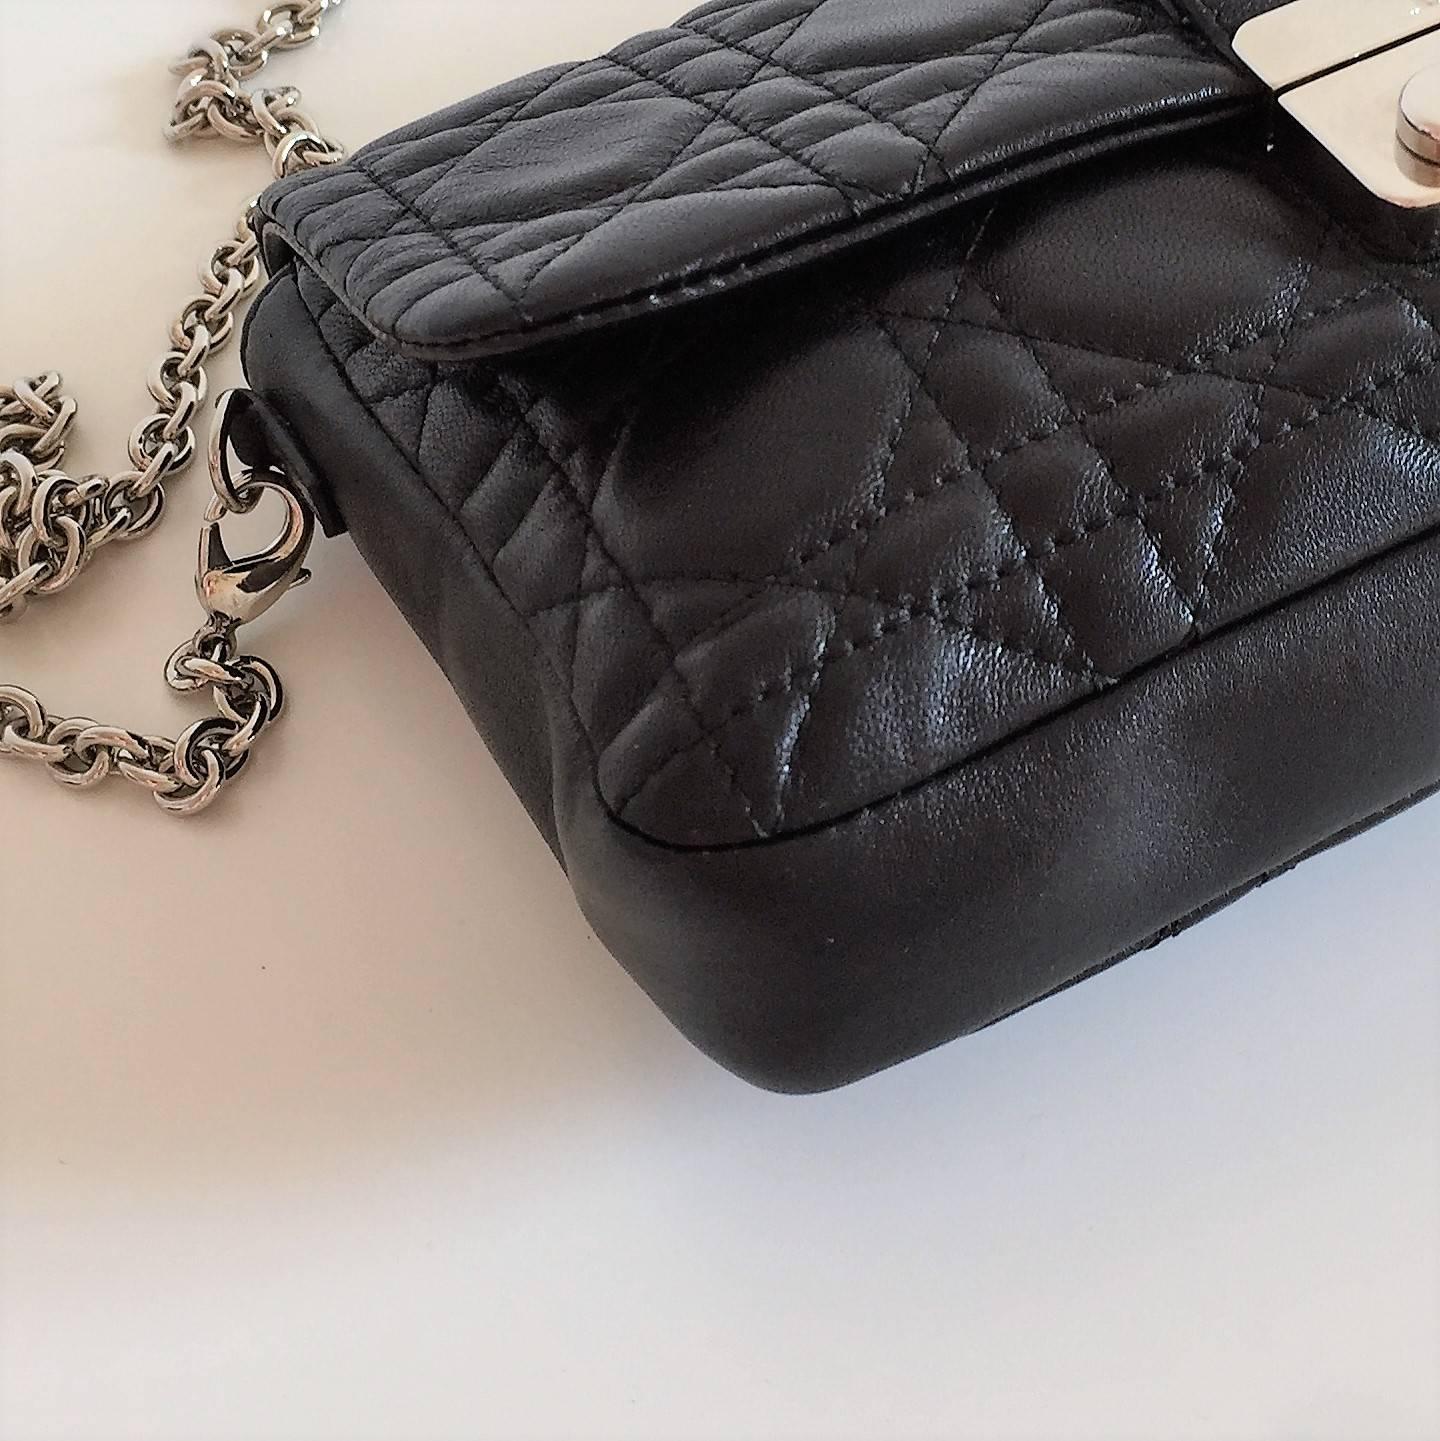 Miss Dior Lock Promenade Black Leather Pochette Wallet on Chain, small bag
Condition: used in excellent condition
Material: Leather.
Colour: Black.
Hardware: Silver.
Dimensions: (aprox) in.  8,6'' W ×  5'' H ×1.2" D   [cm. 22 × 12,7 × 3] 